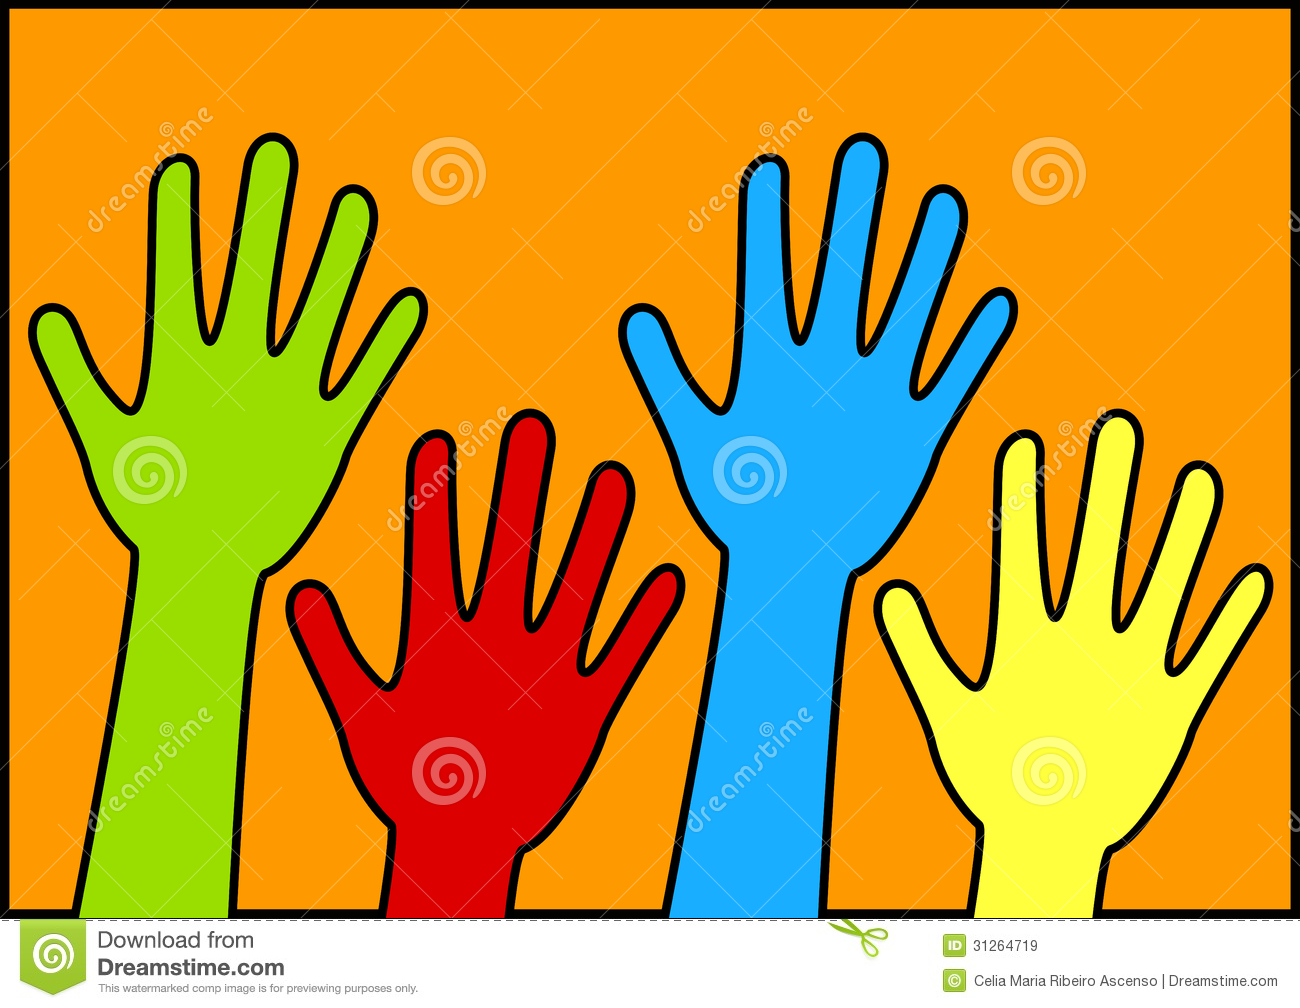 Voting Or Volunteering Hands Poster Royalty Free Stock Images   Image